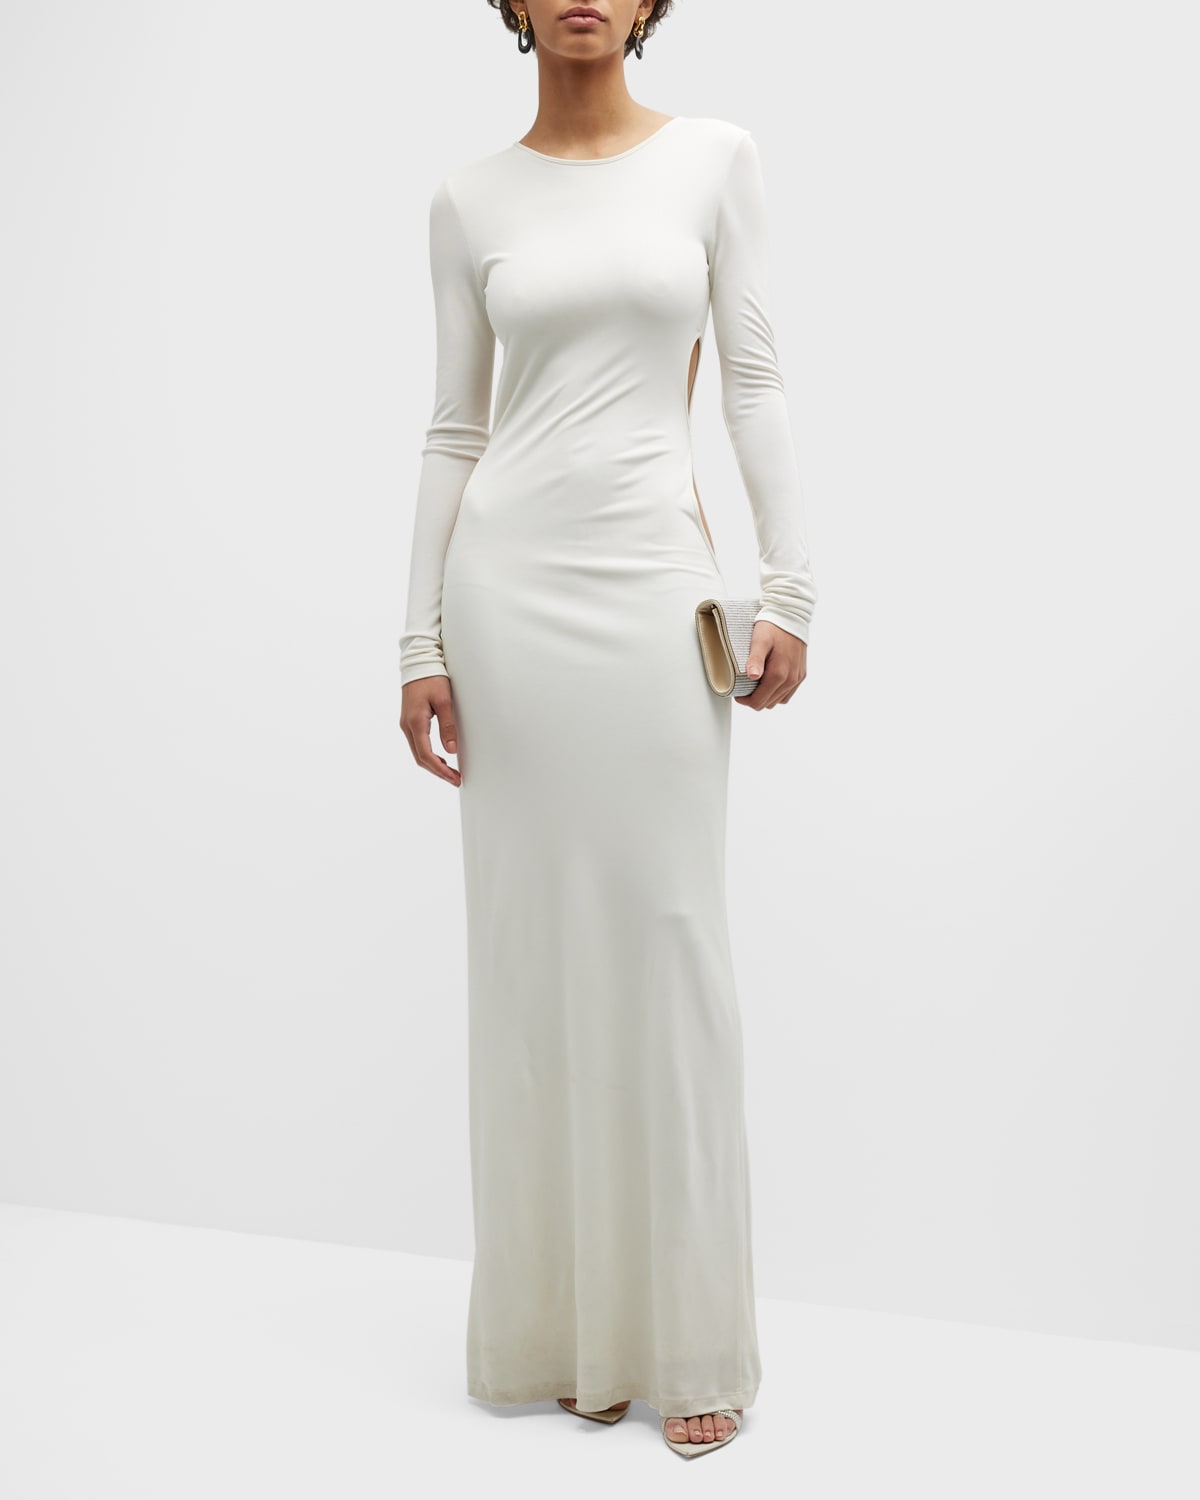 Zeynep Arcay Infinity Jersey Dress With Cutout Detail In White